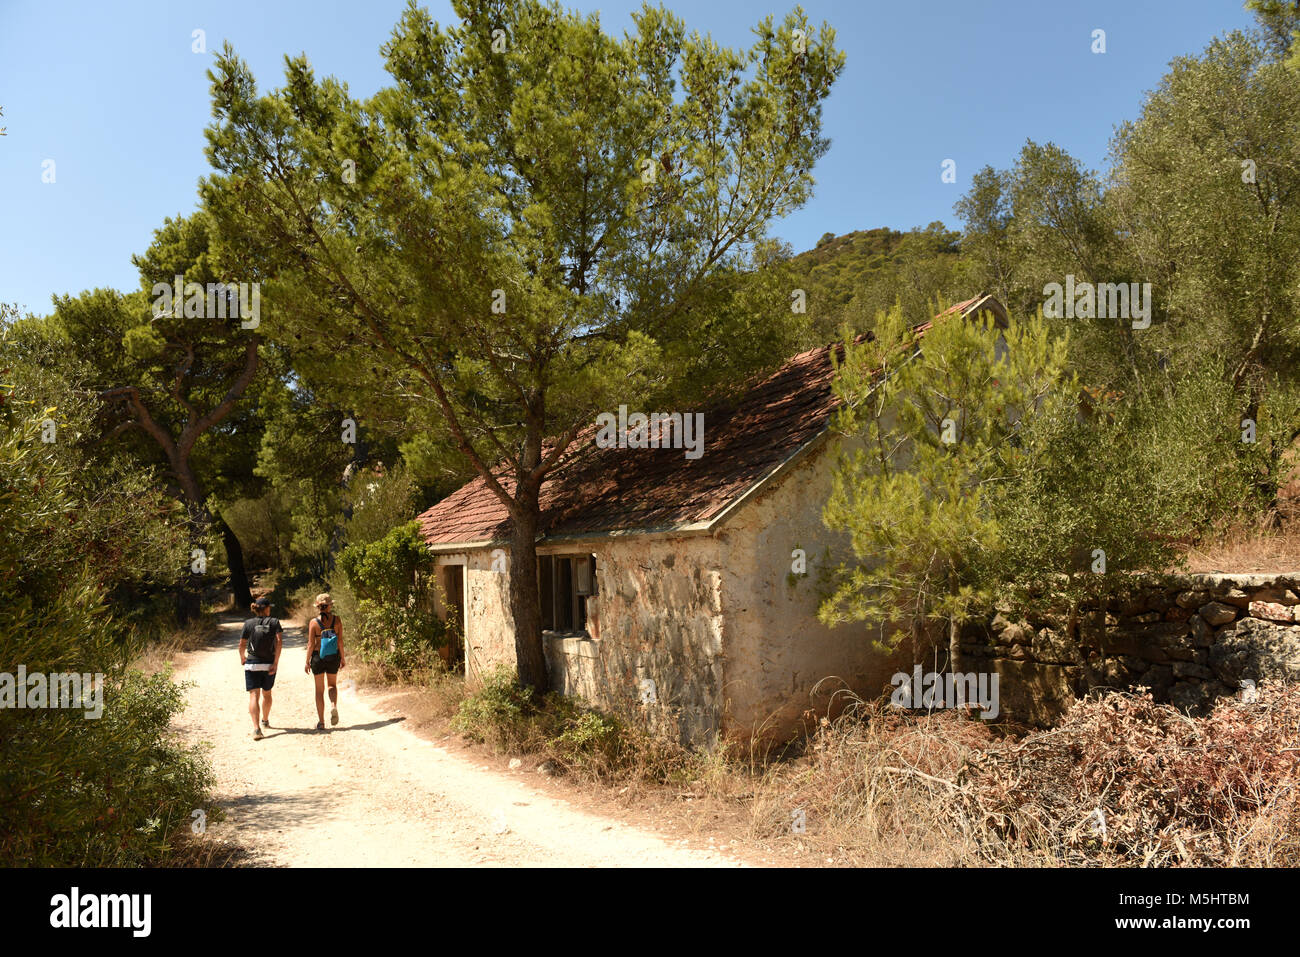 Abandoned military facility on the island Lastovo, Croatia. Yugoslav People's Army was stationed here because Lastovo was one of its main military bas Stock Photo